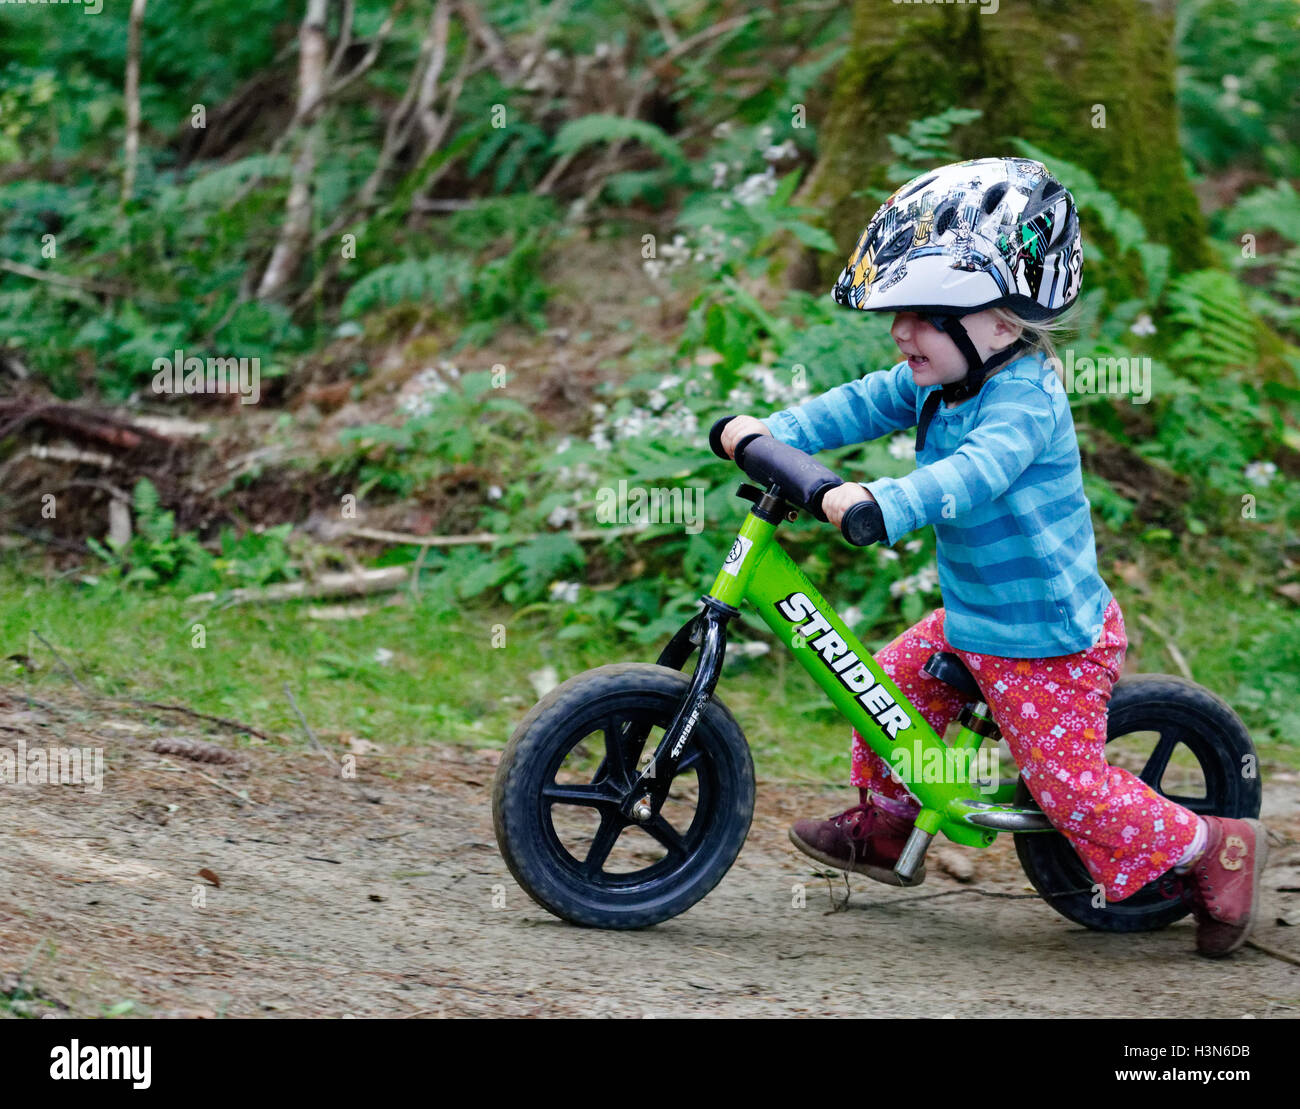 A two year old girl on a balance bike pump track. Taken on Leapfrog pump track at Kingdom Trails Vermont Stock Photo